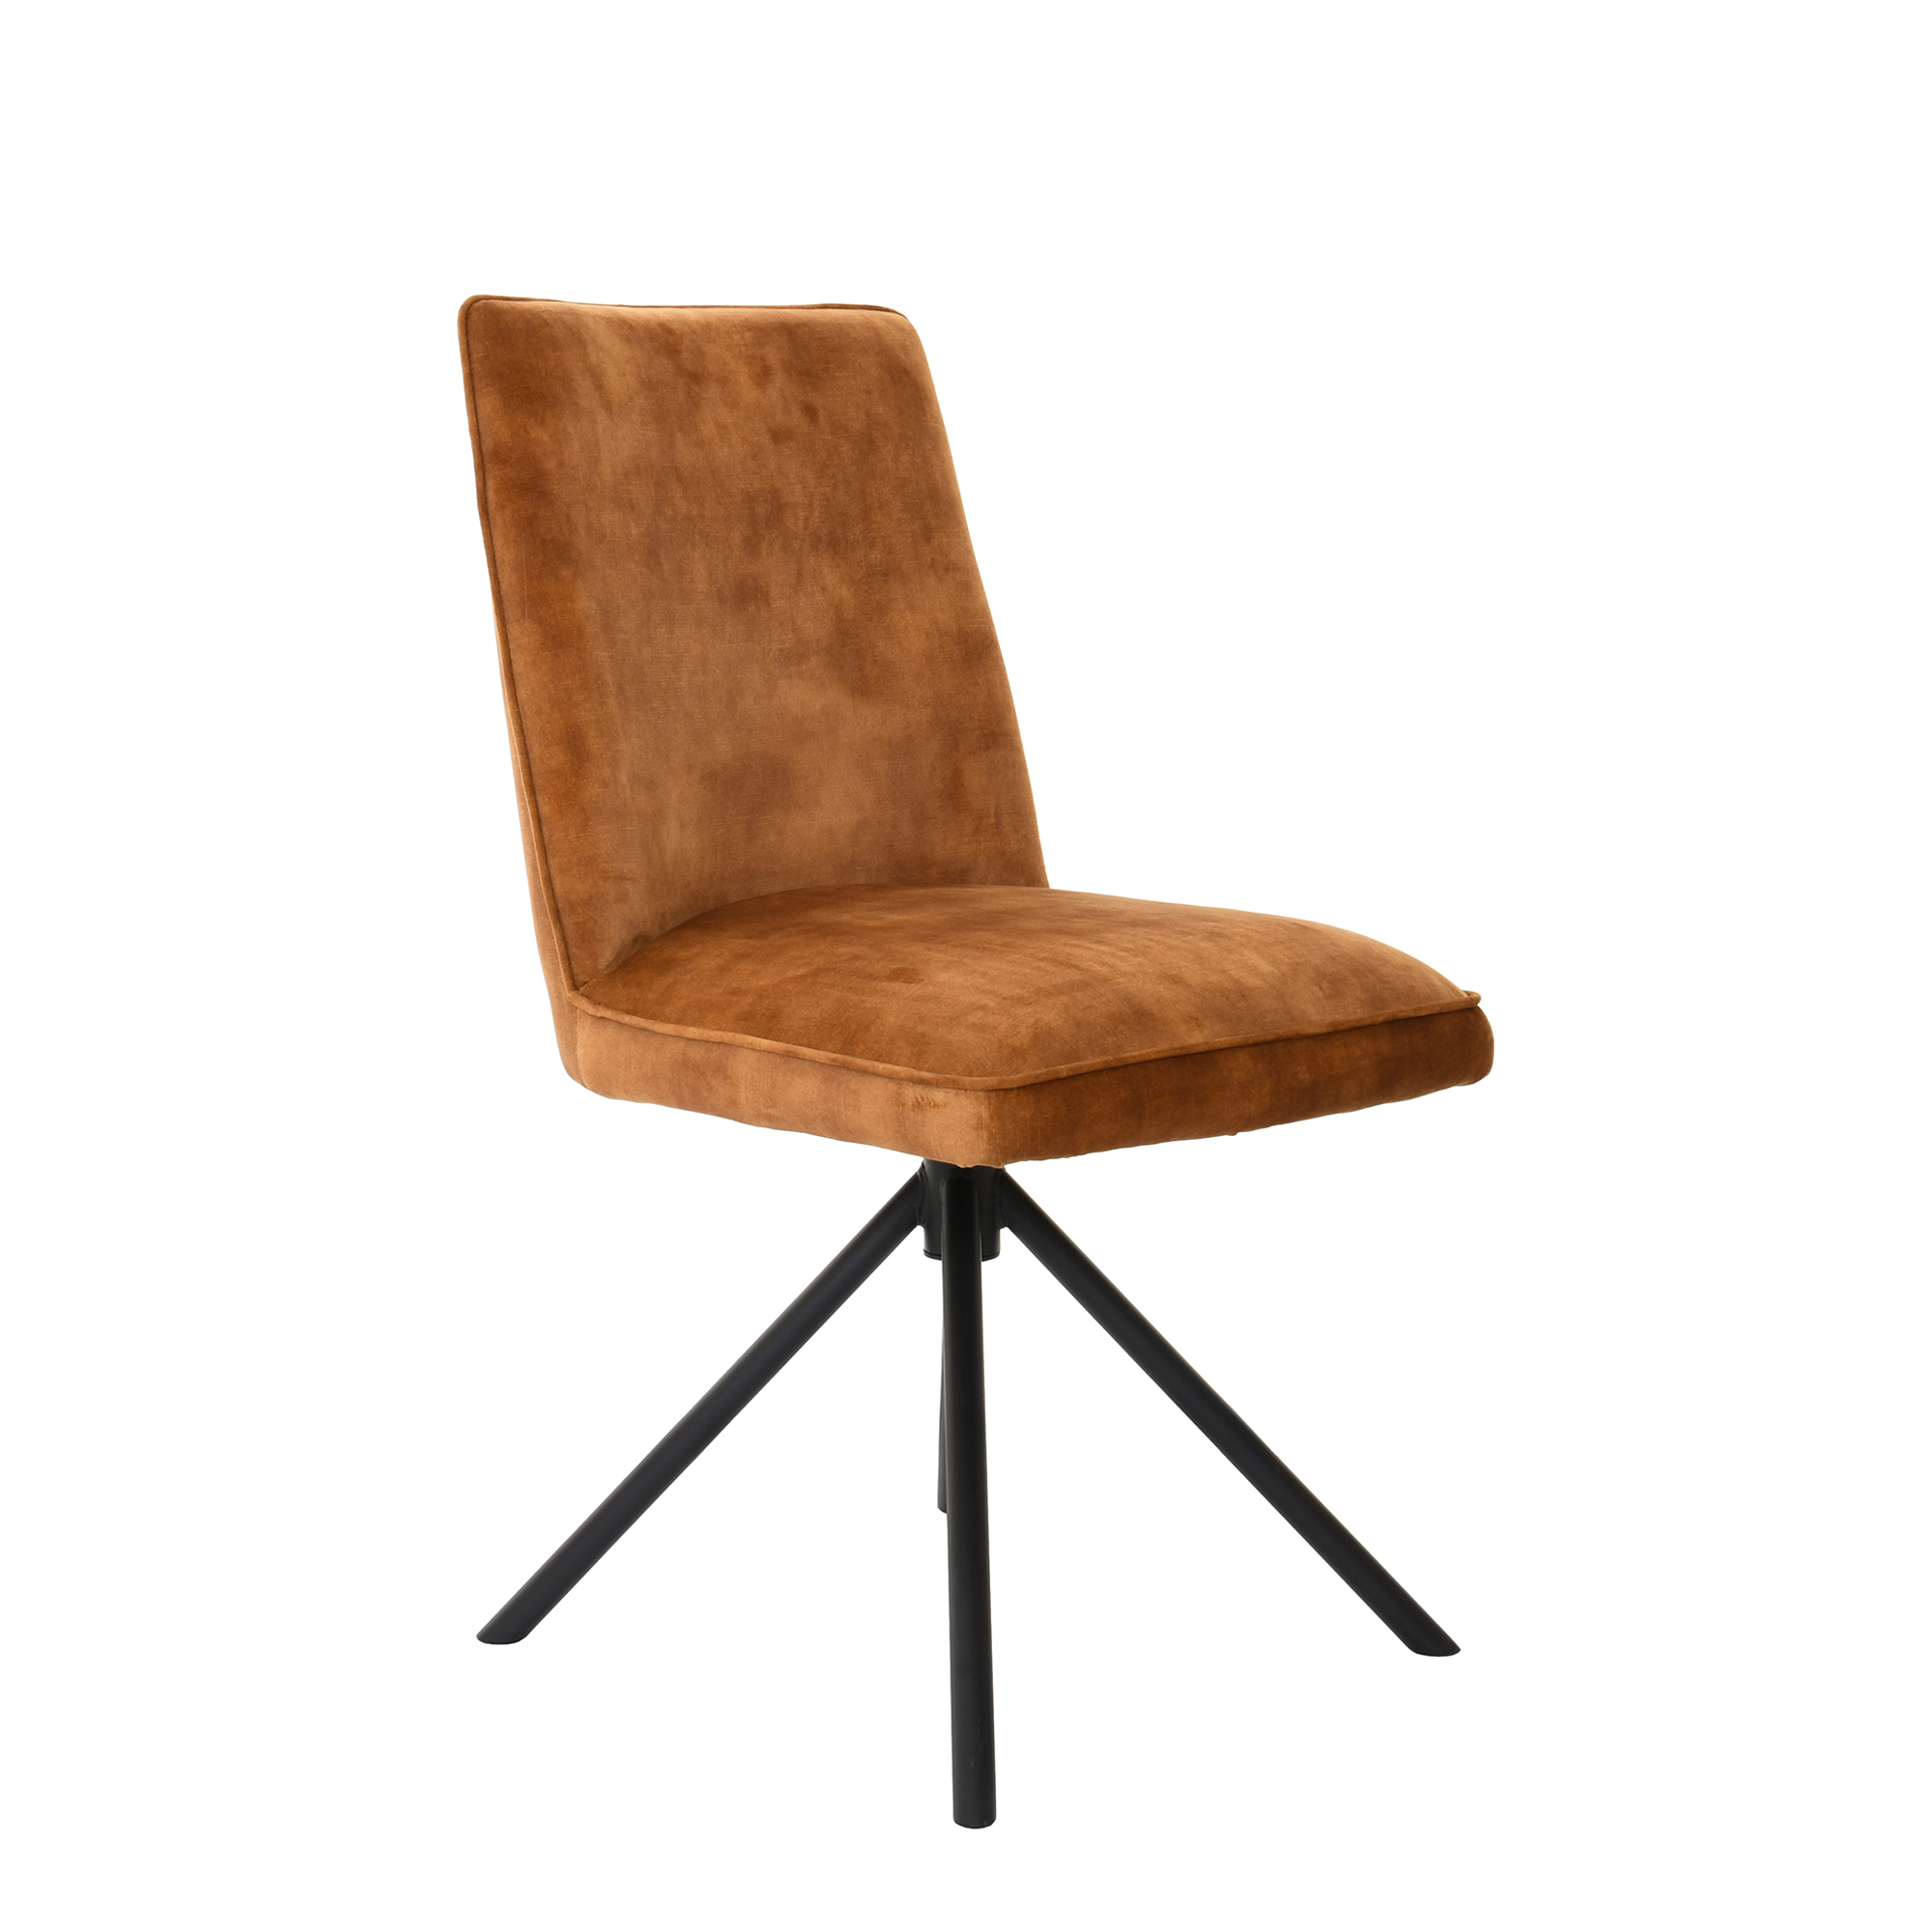 Imola - Velvet Swivel Dining Chair - Dining Chairs - Fishpools